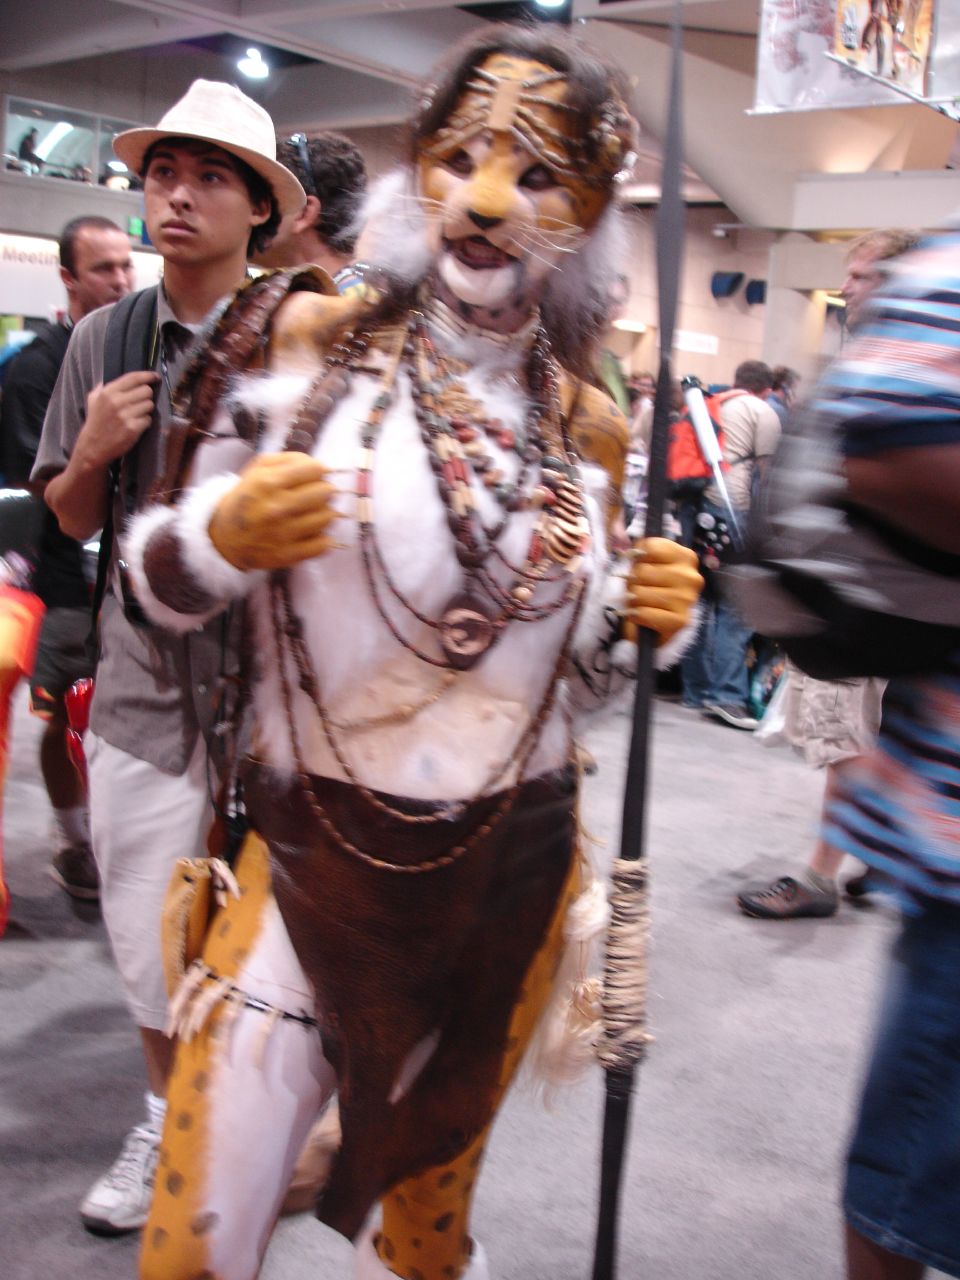 a person in costume standing next to a pole